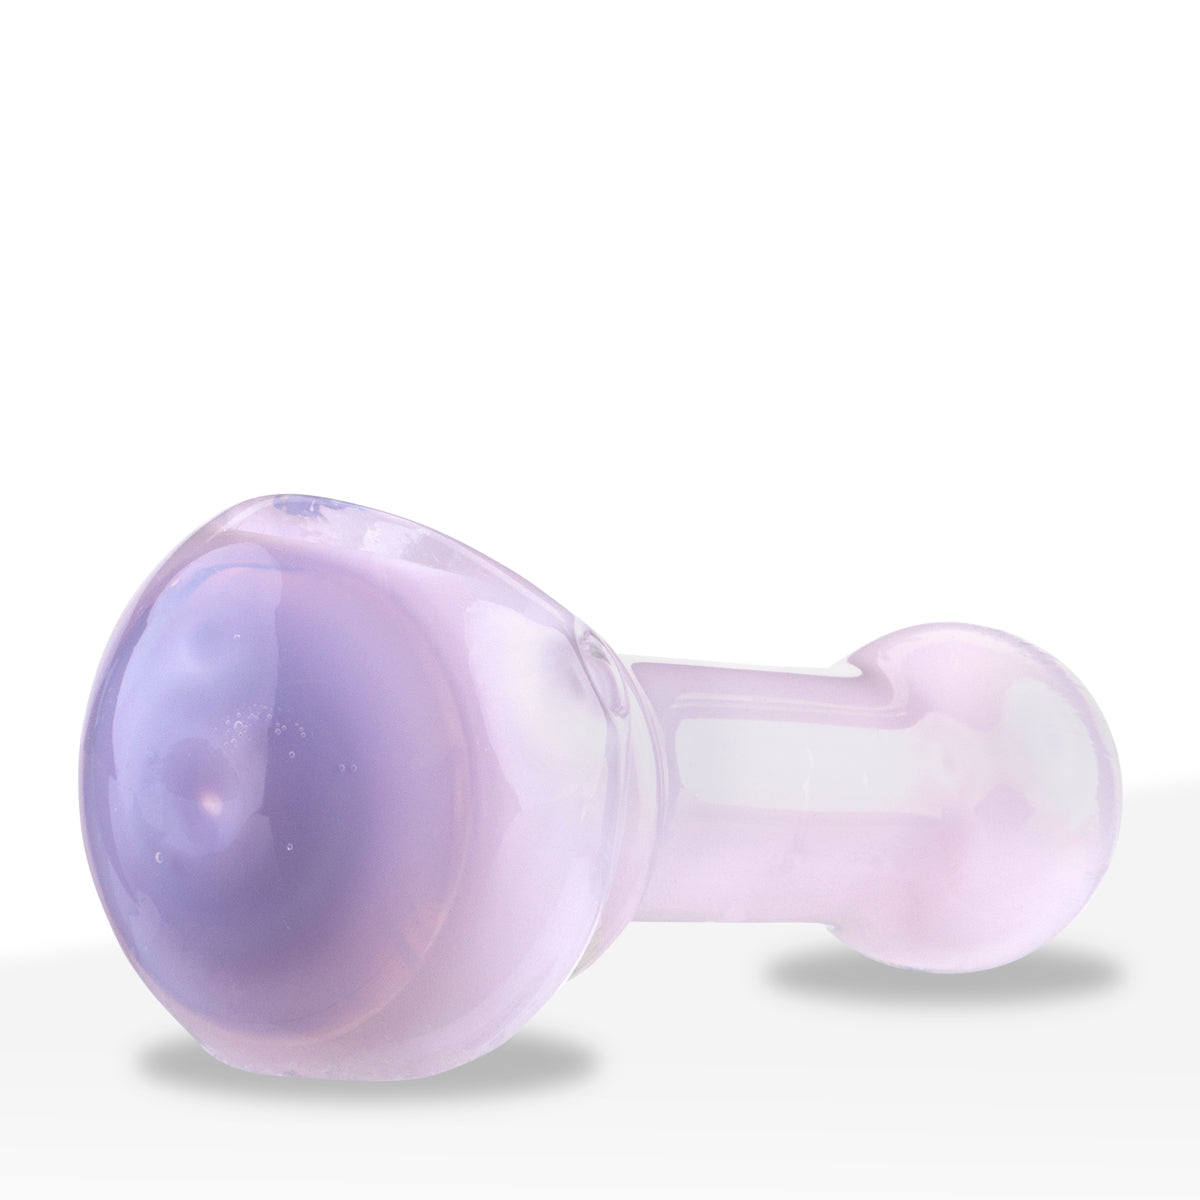 Hand Pipe | Classic Glass Spoon Two Tone Slyme Ring Hand Pipe | 3.5" - Glass - 3 Count